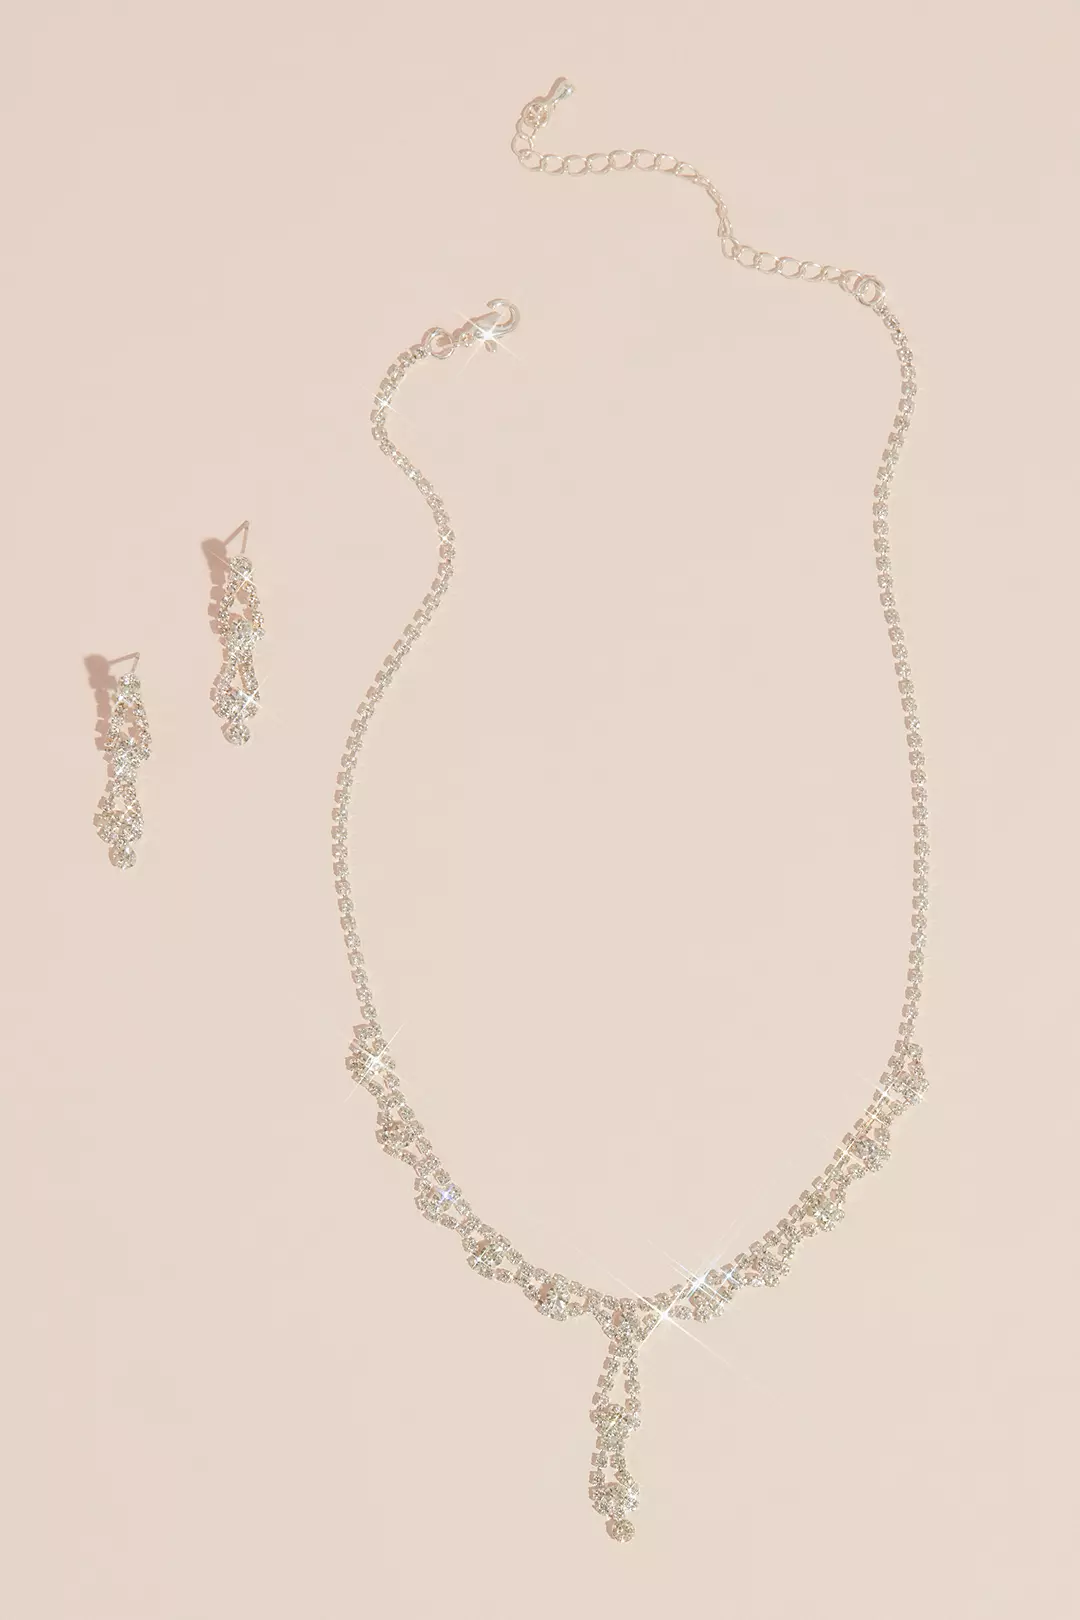 Double Drop Crystal Earring and Necklace Set Image 1